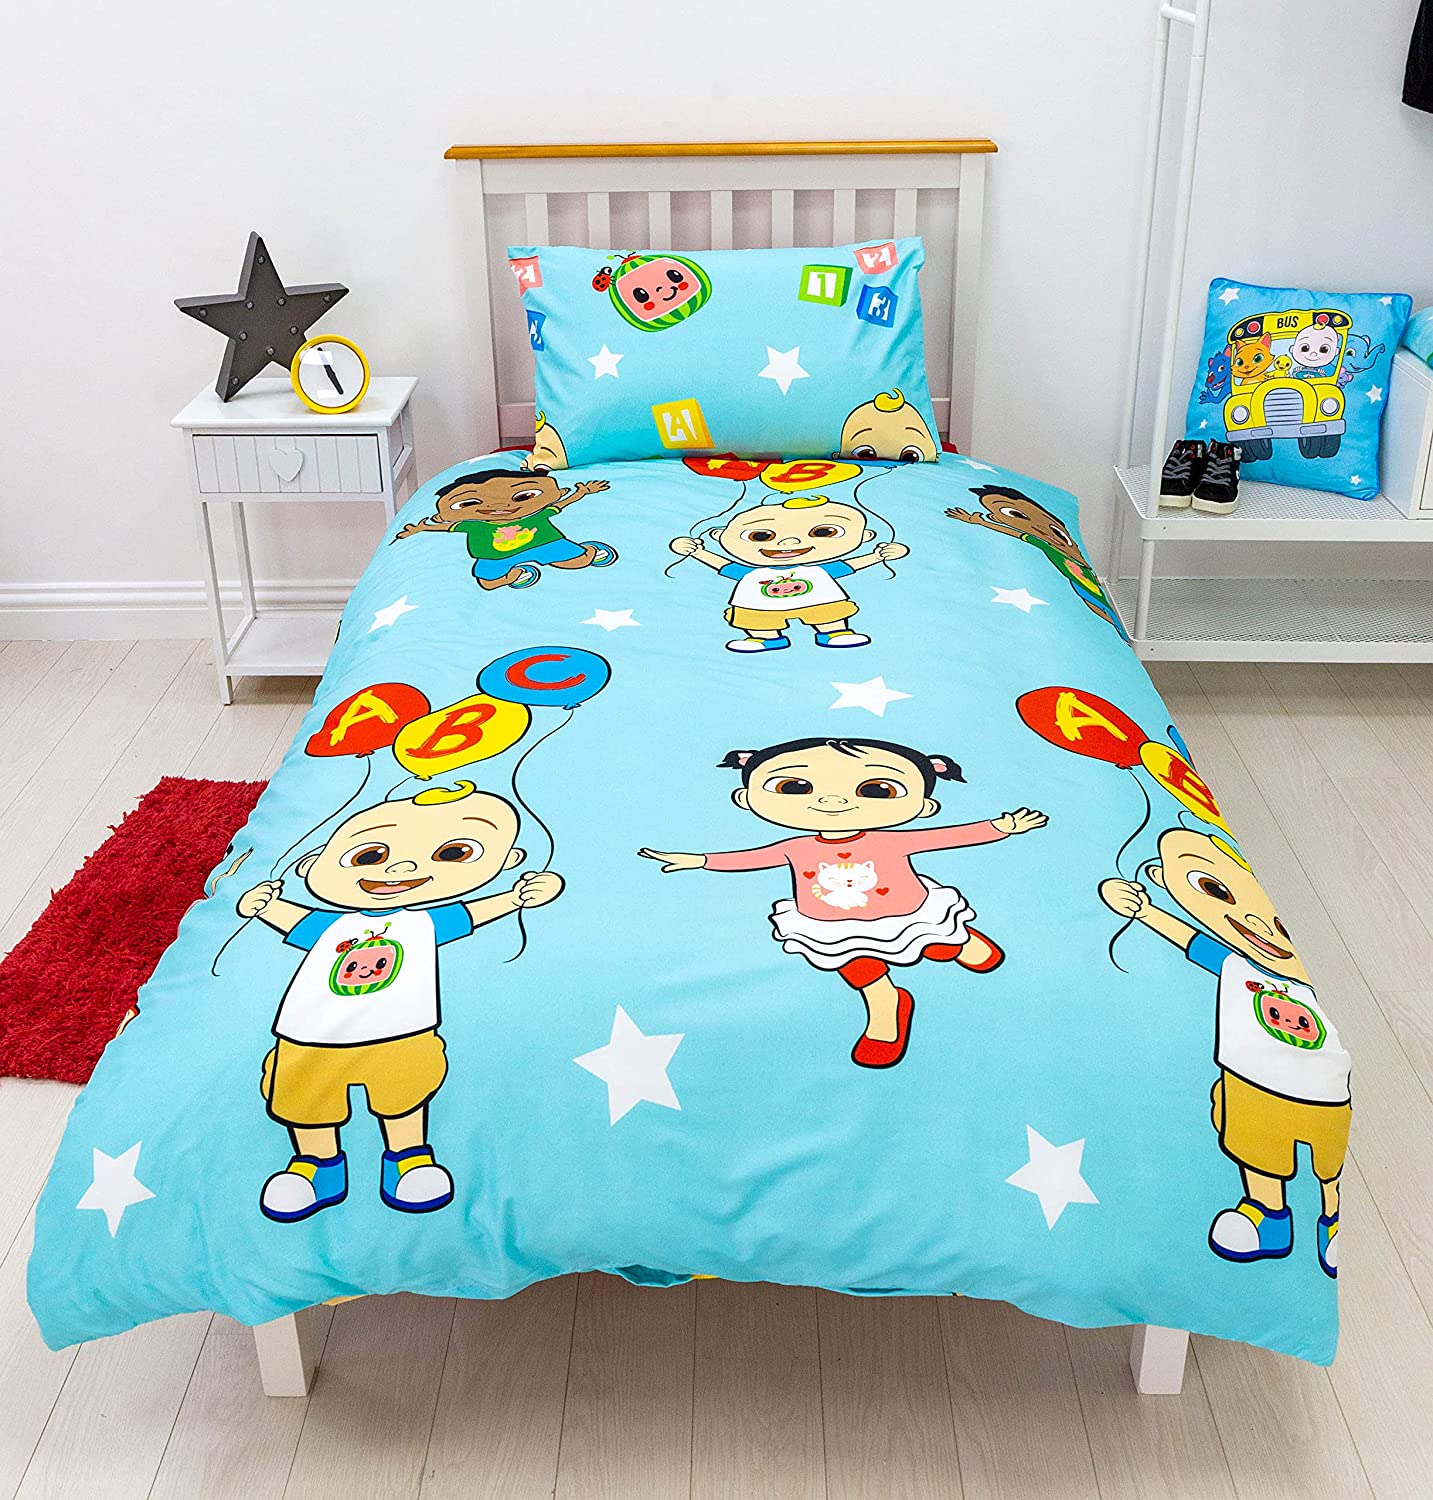 Single Bed Cocomelon Official Duvet Cover Set Reversible 2 Sided Character Bedding